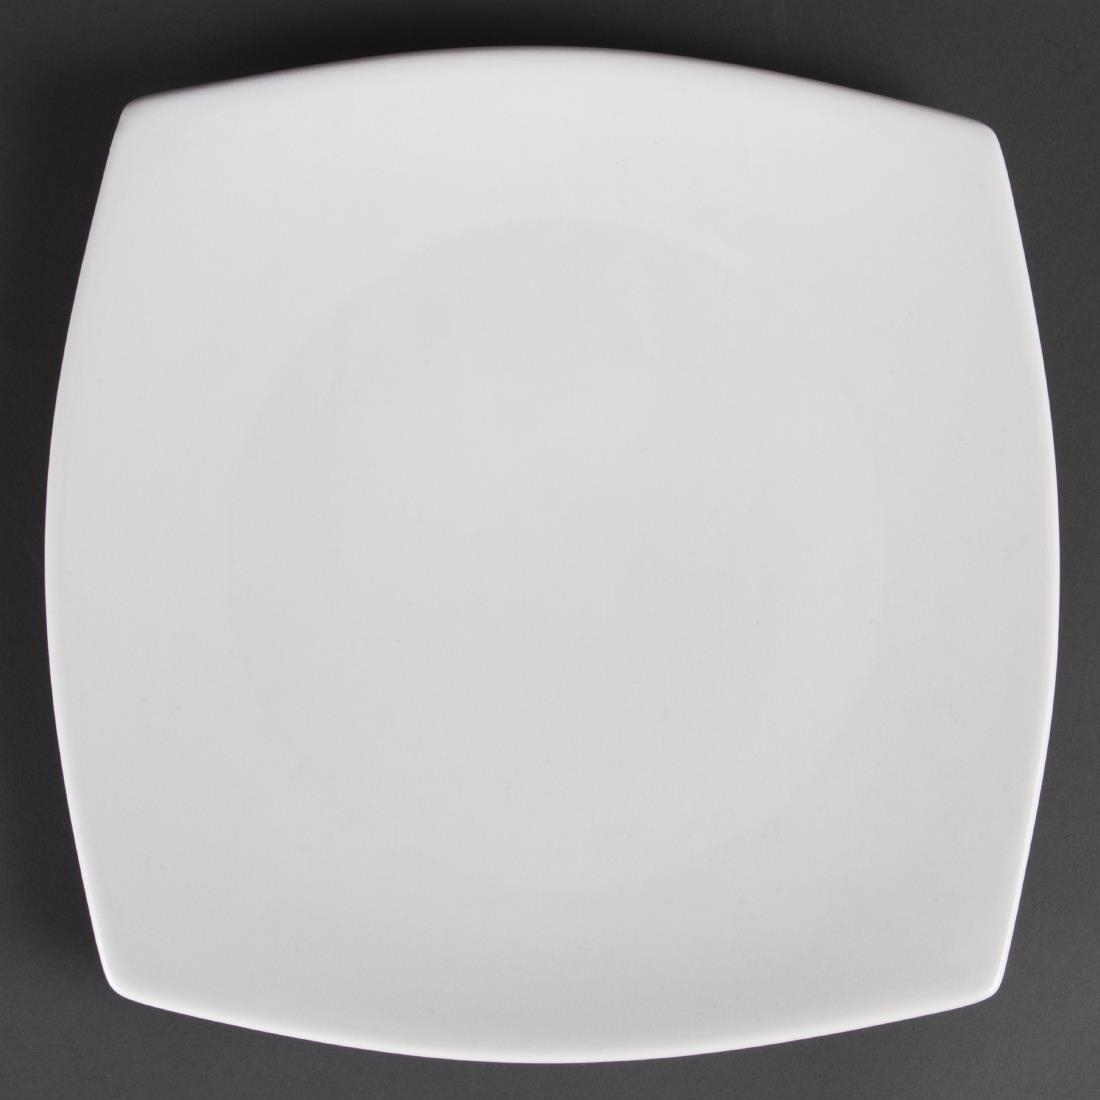 Olympia Whiteware Rounded Square Plates 270mm (Pack of 6)